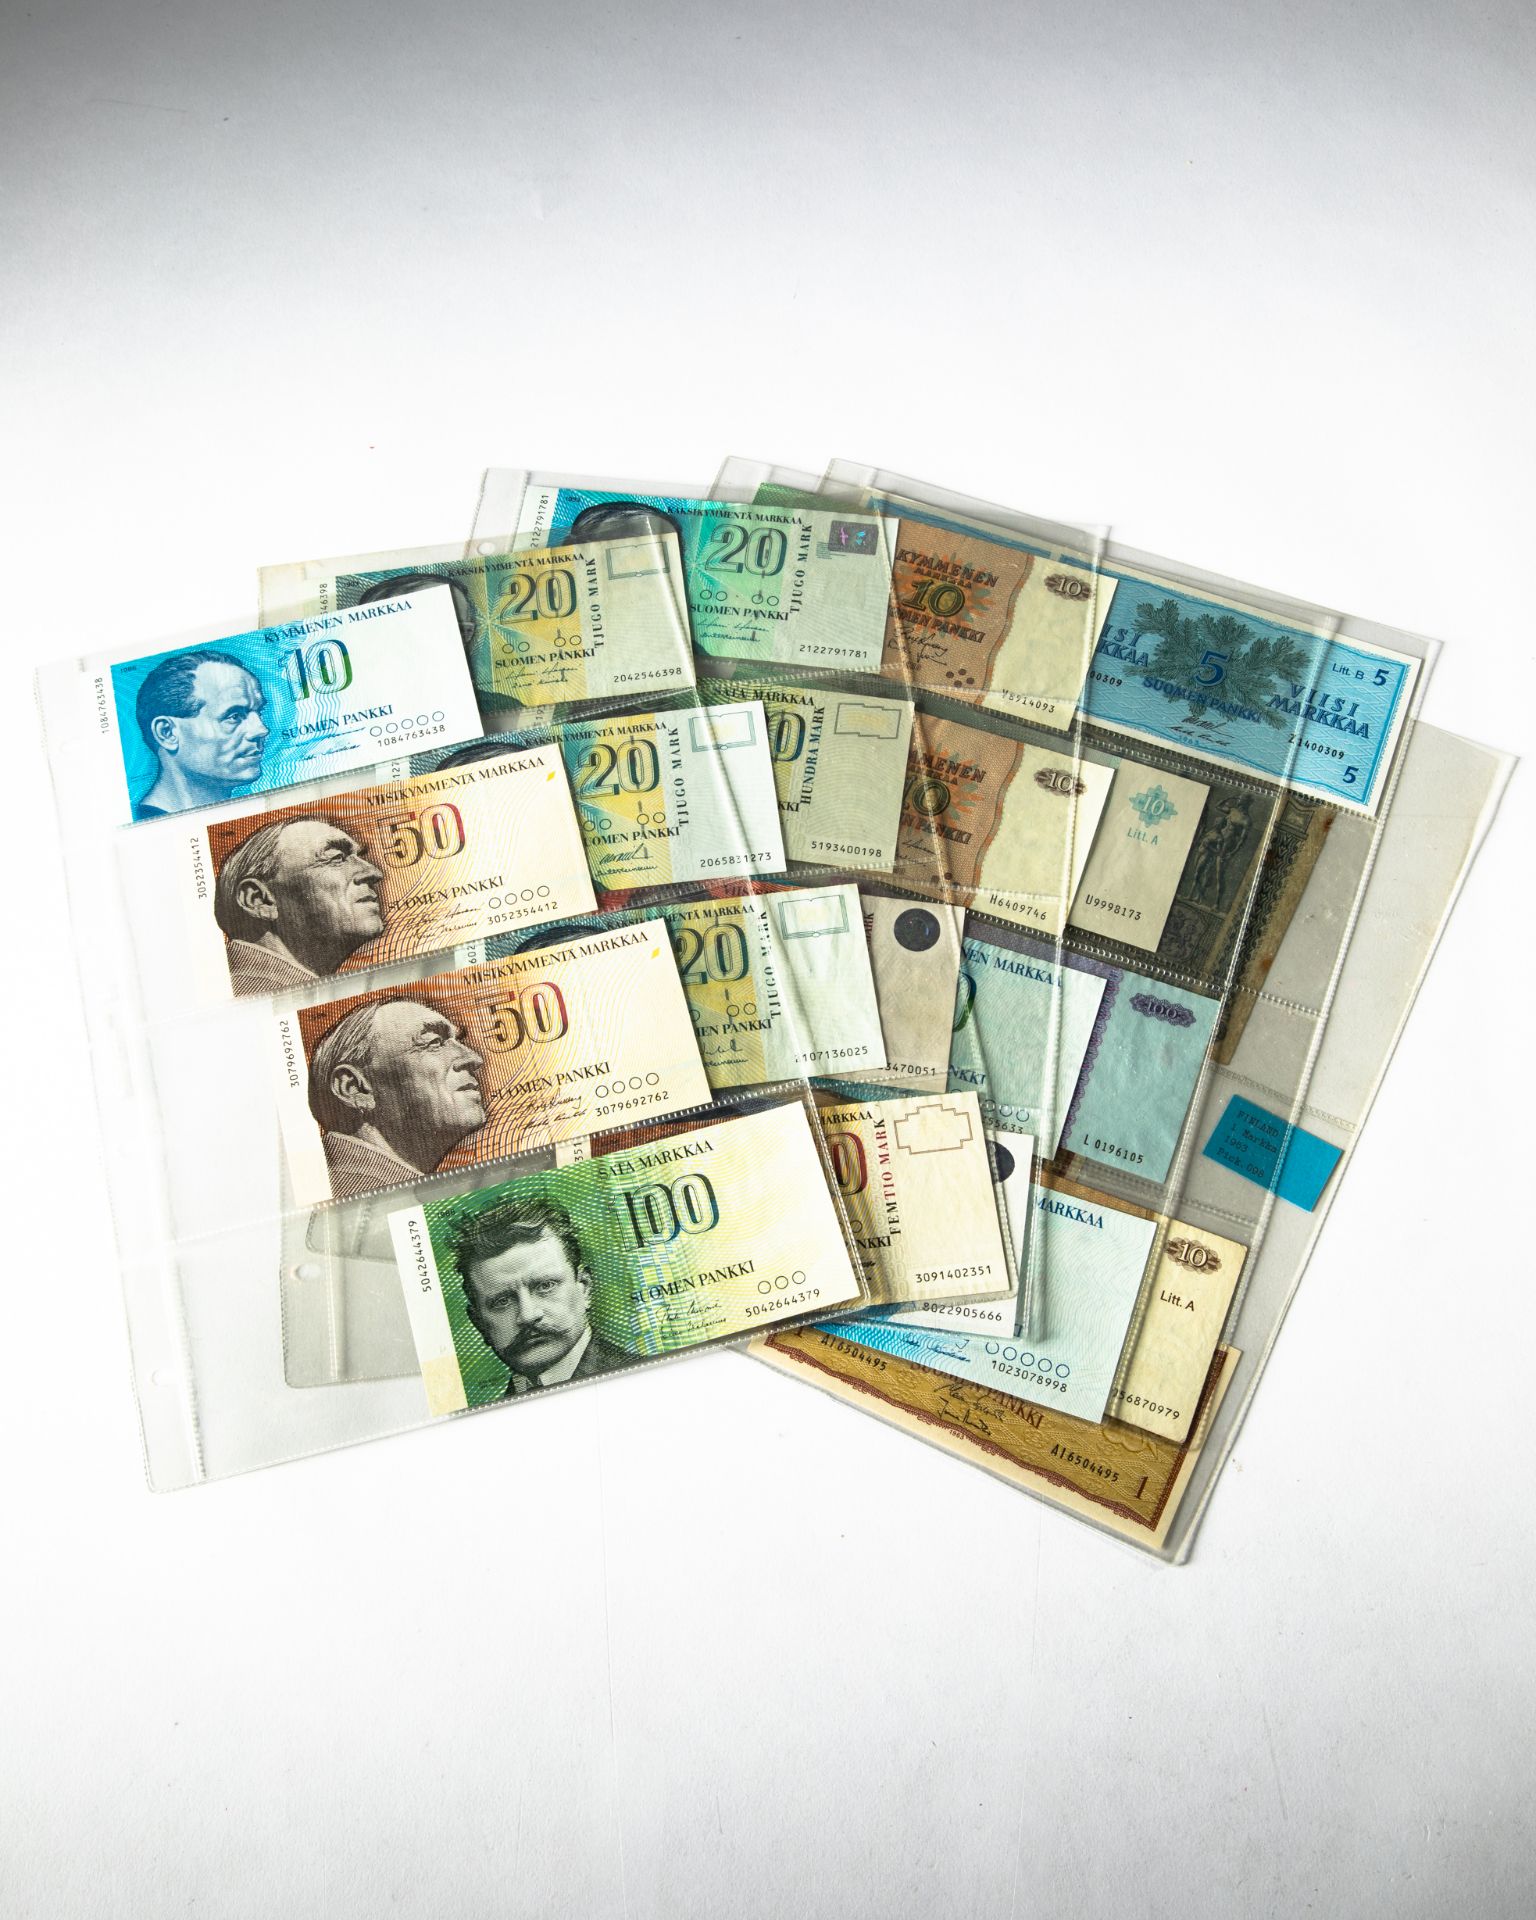 Convolute of bank notes from various countries